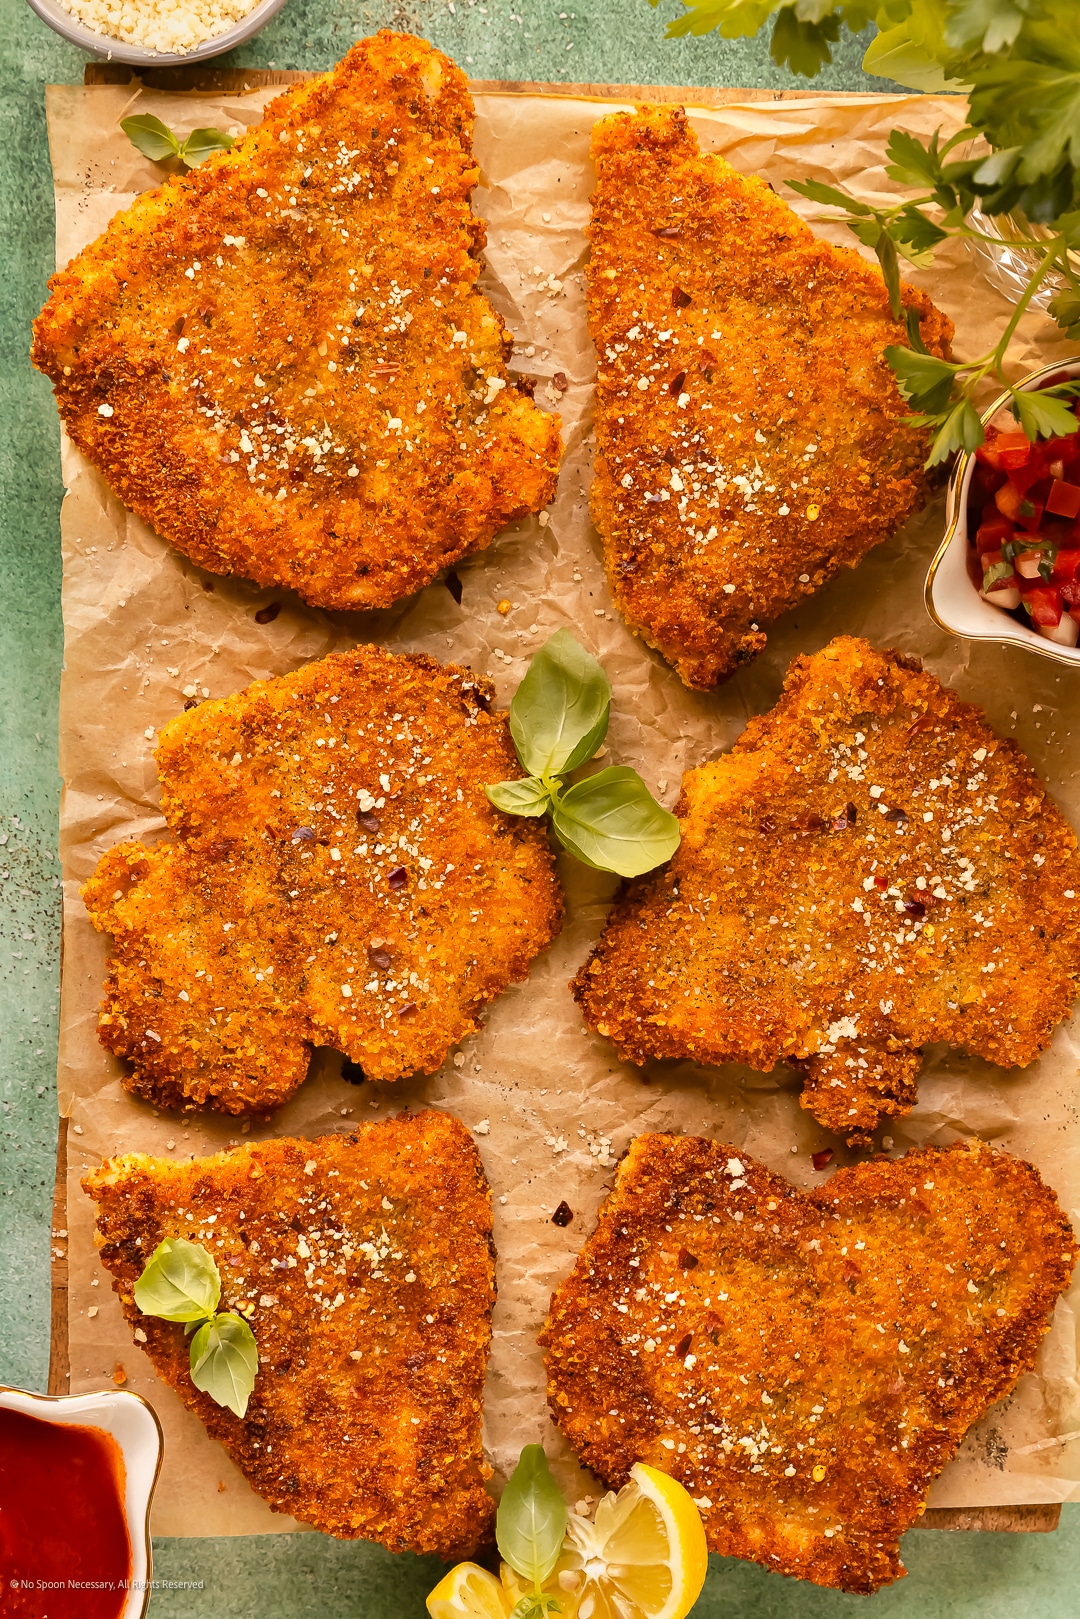 Crusted Parmesan Chicken Cutlets: Pantry Staple 30-Minute Recipe